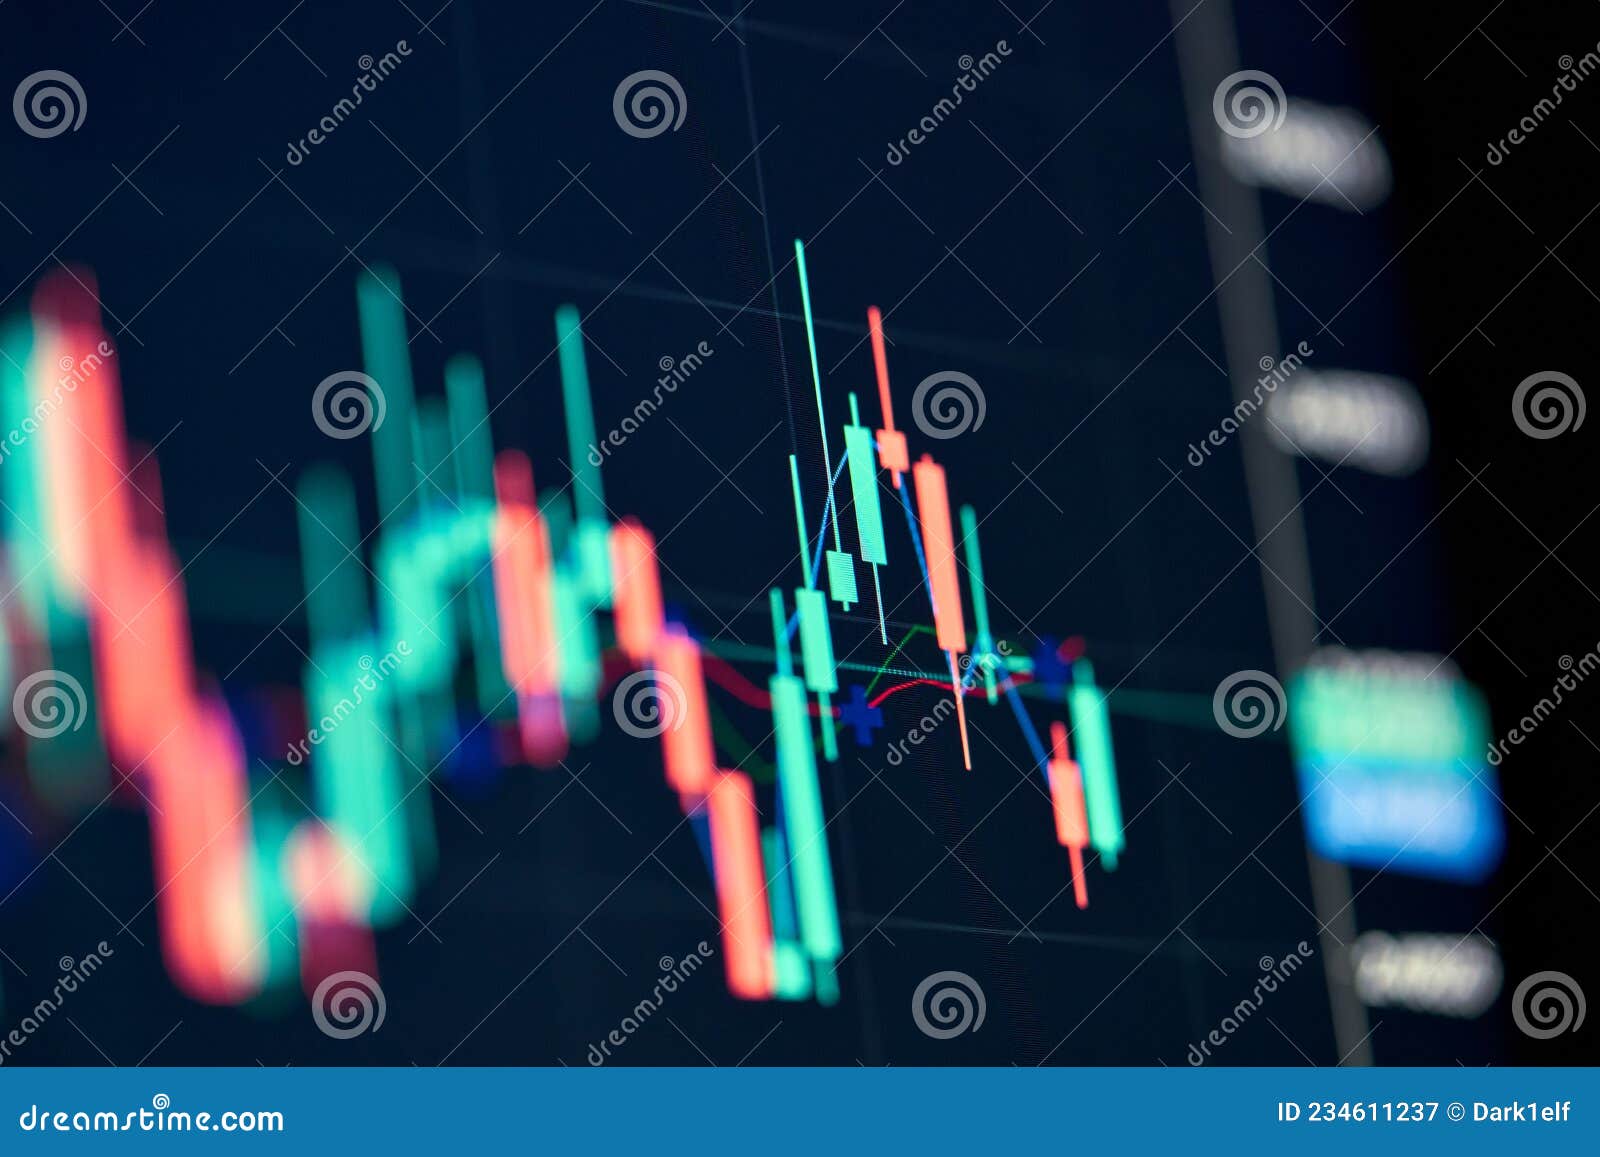 stockmarket online trading chart candlestick on crypto currency platform.